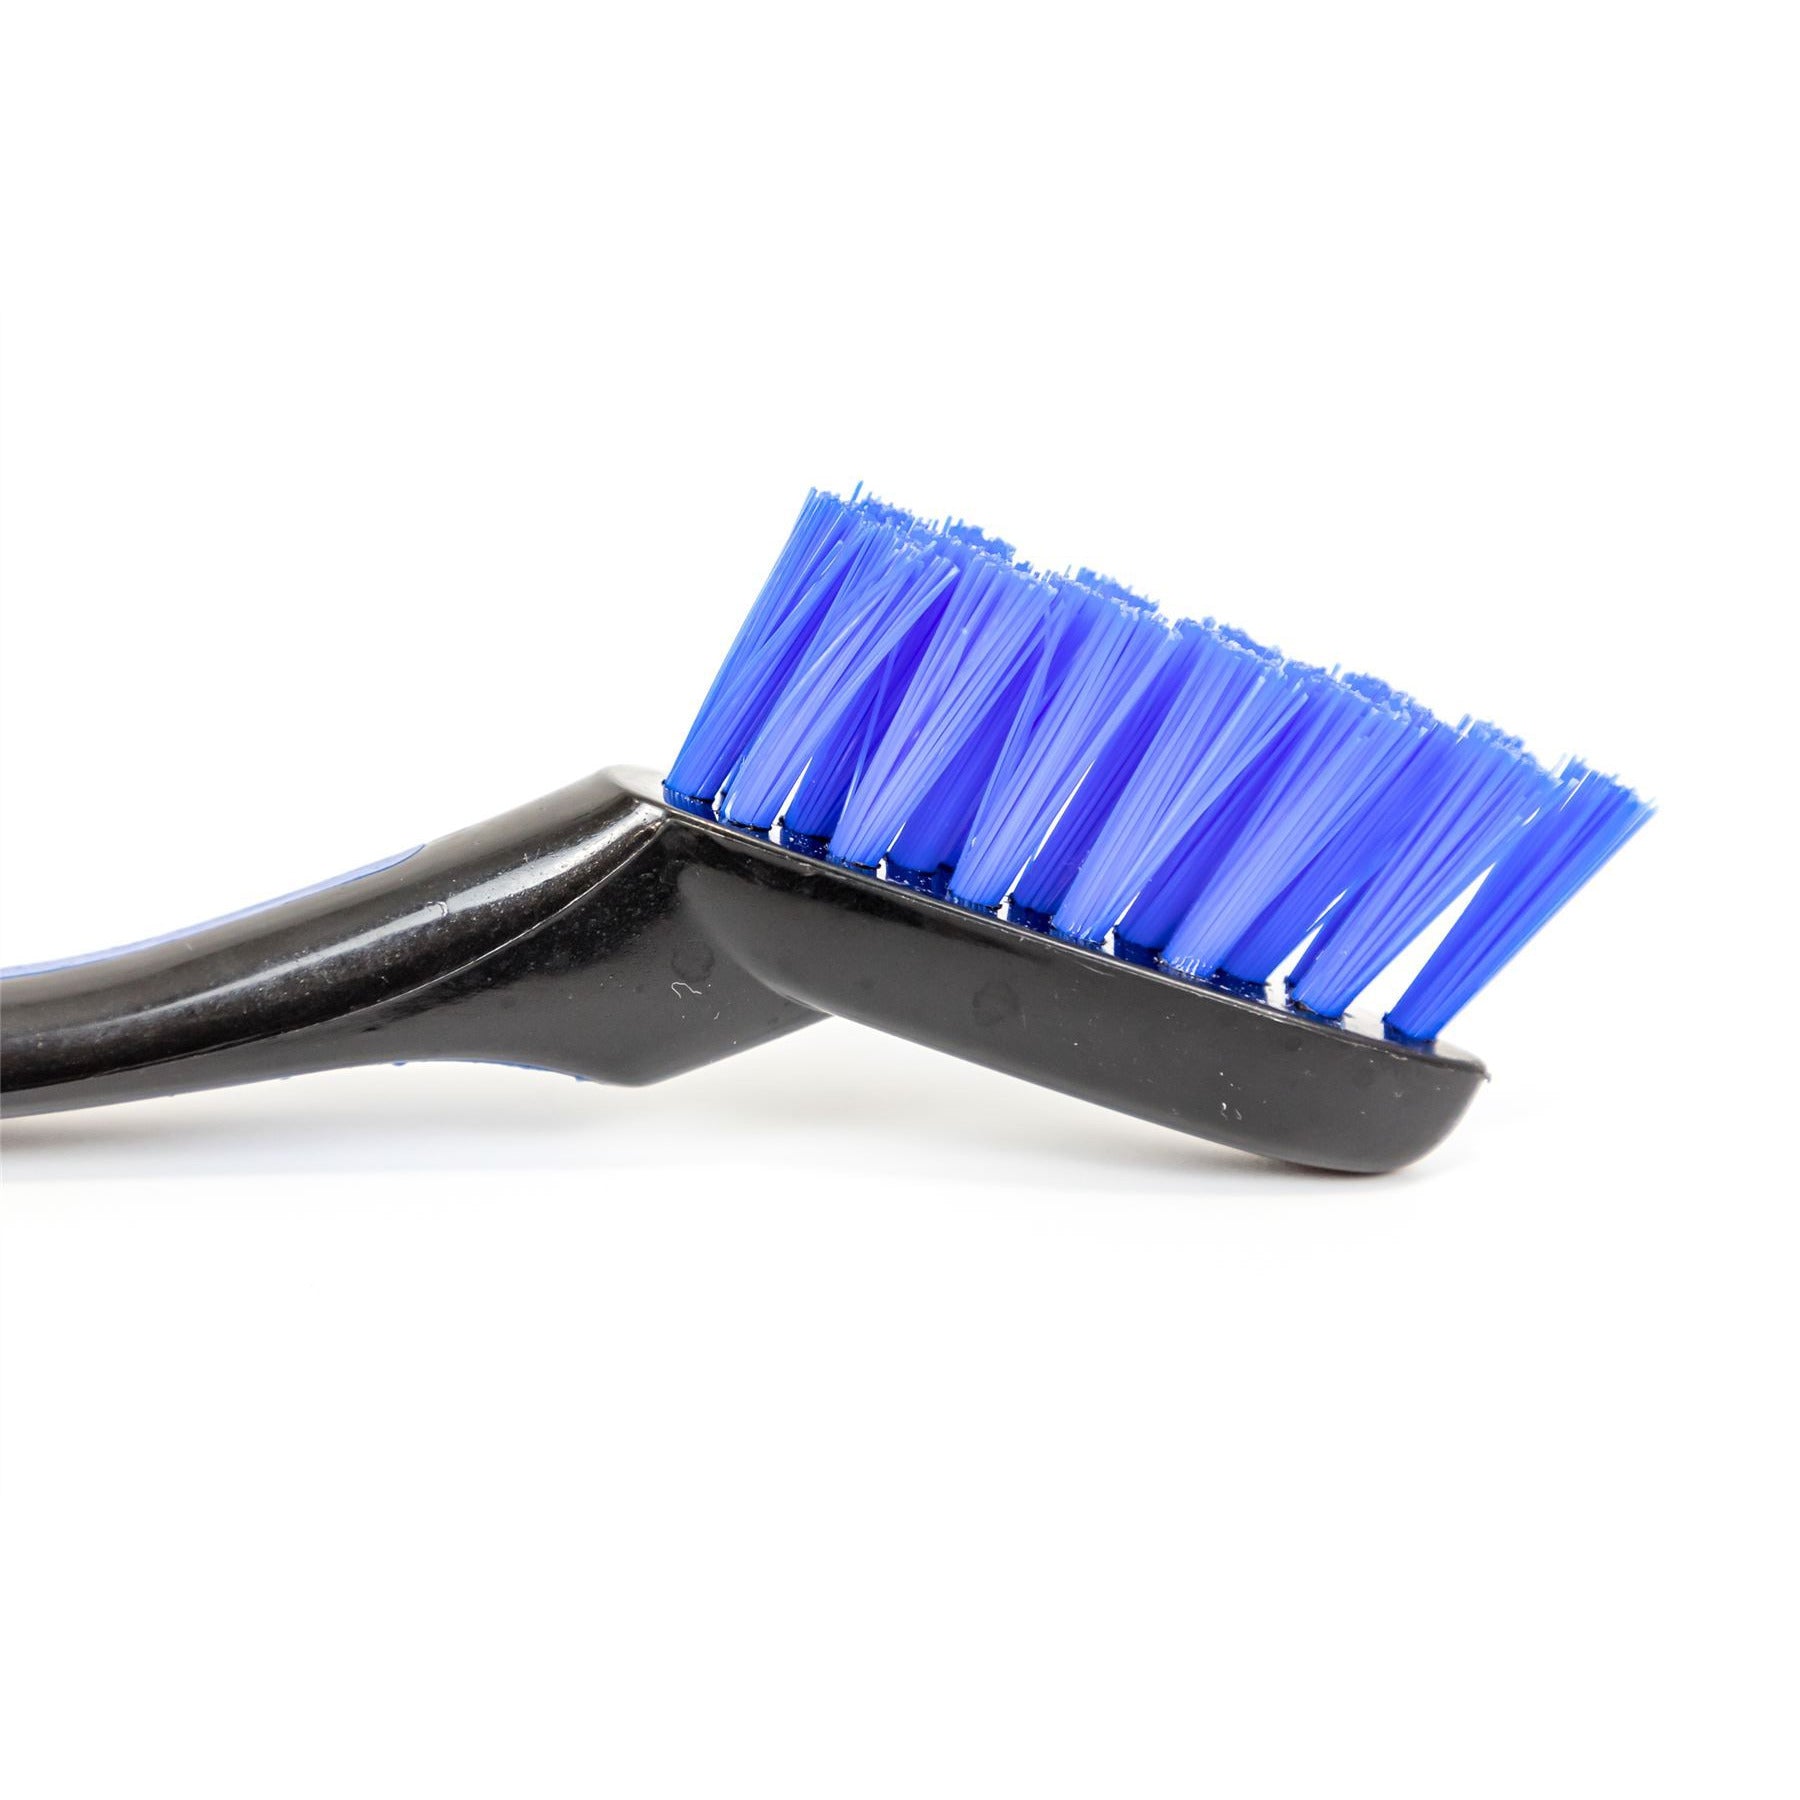 Small Nylon Cleaning Brush - Perfect for Cleaning Grout & Mould